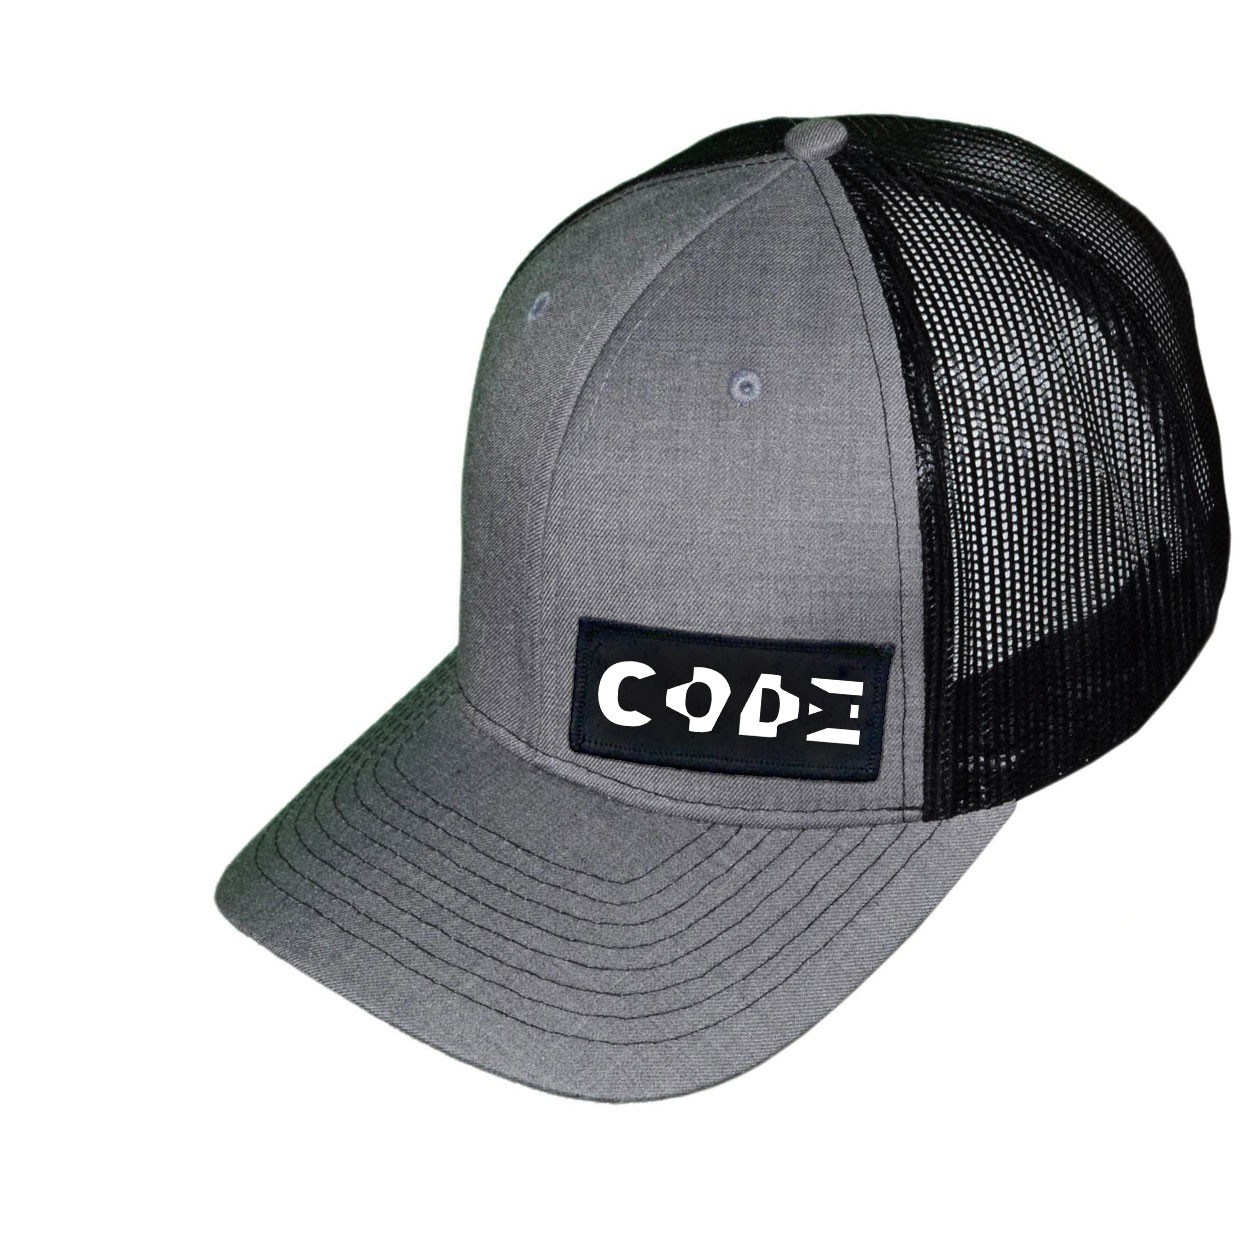 Code Tag Logo Night Out Woven Patch Snapback Trucker Hat Heather Gray/Black (White Logo)